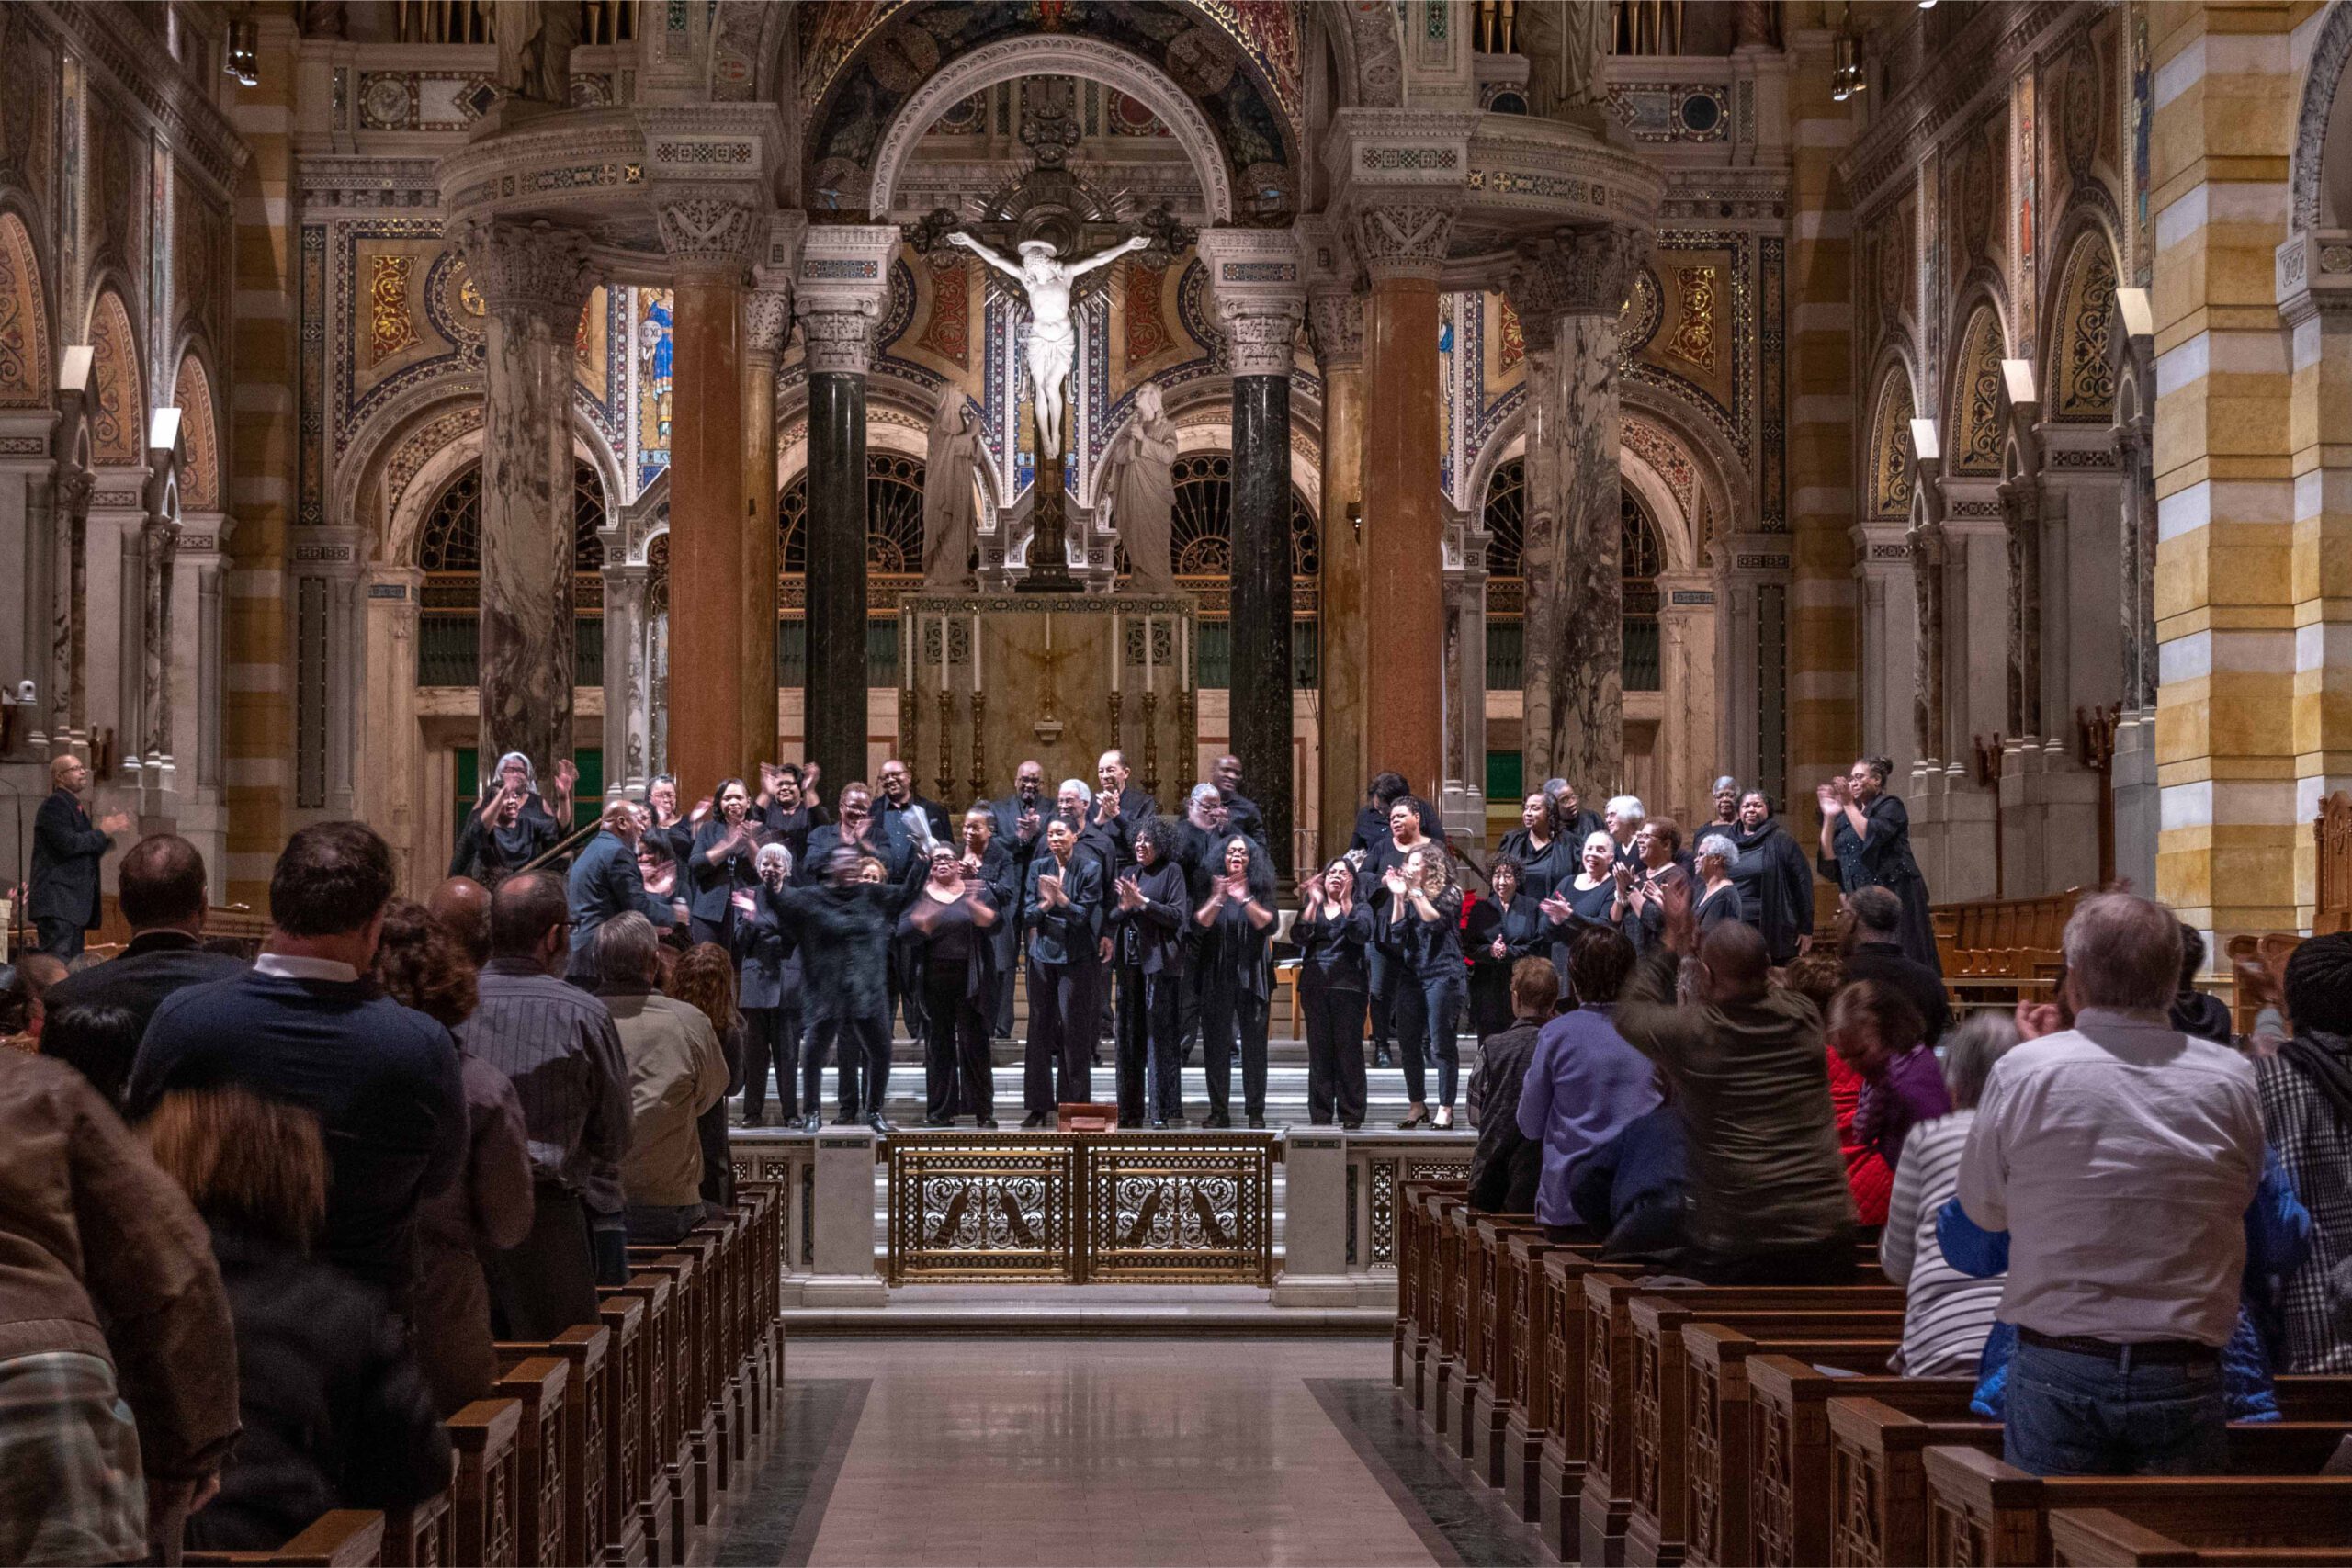 North City Deanery Choir live at Cathedral Basilica of Saint Louis.